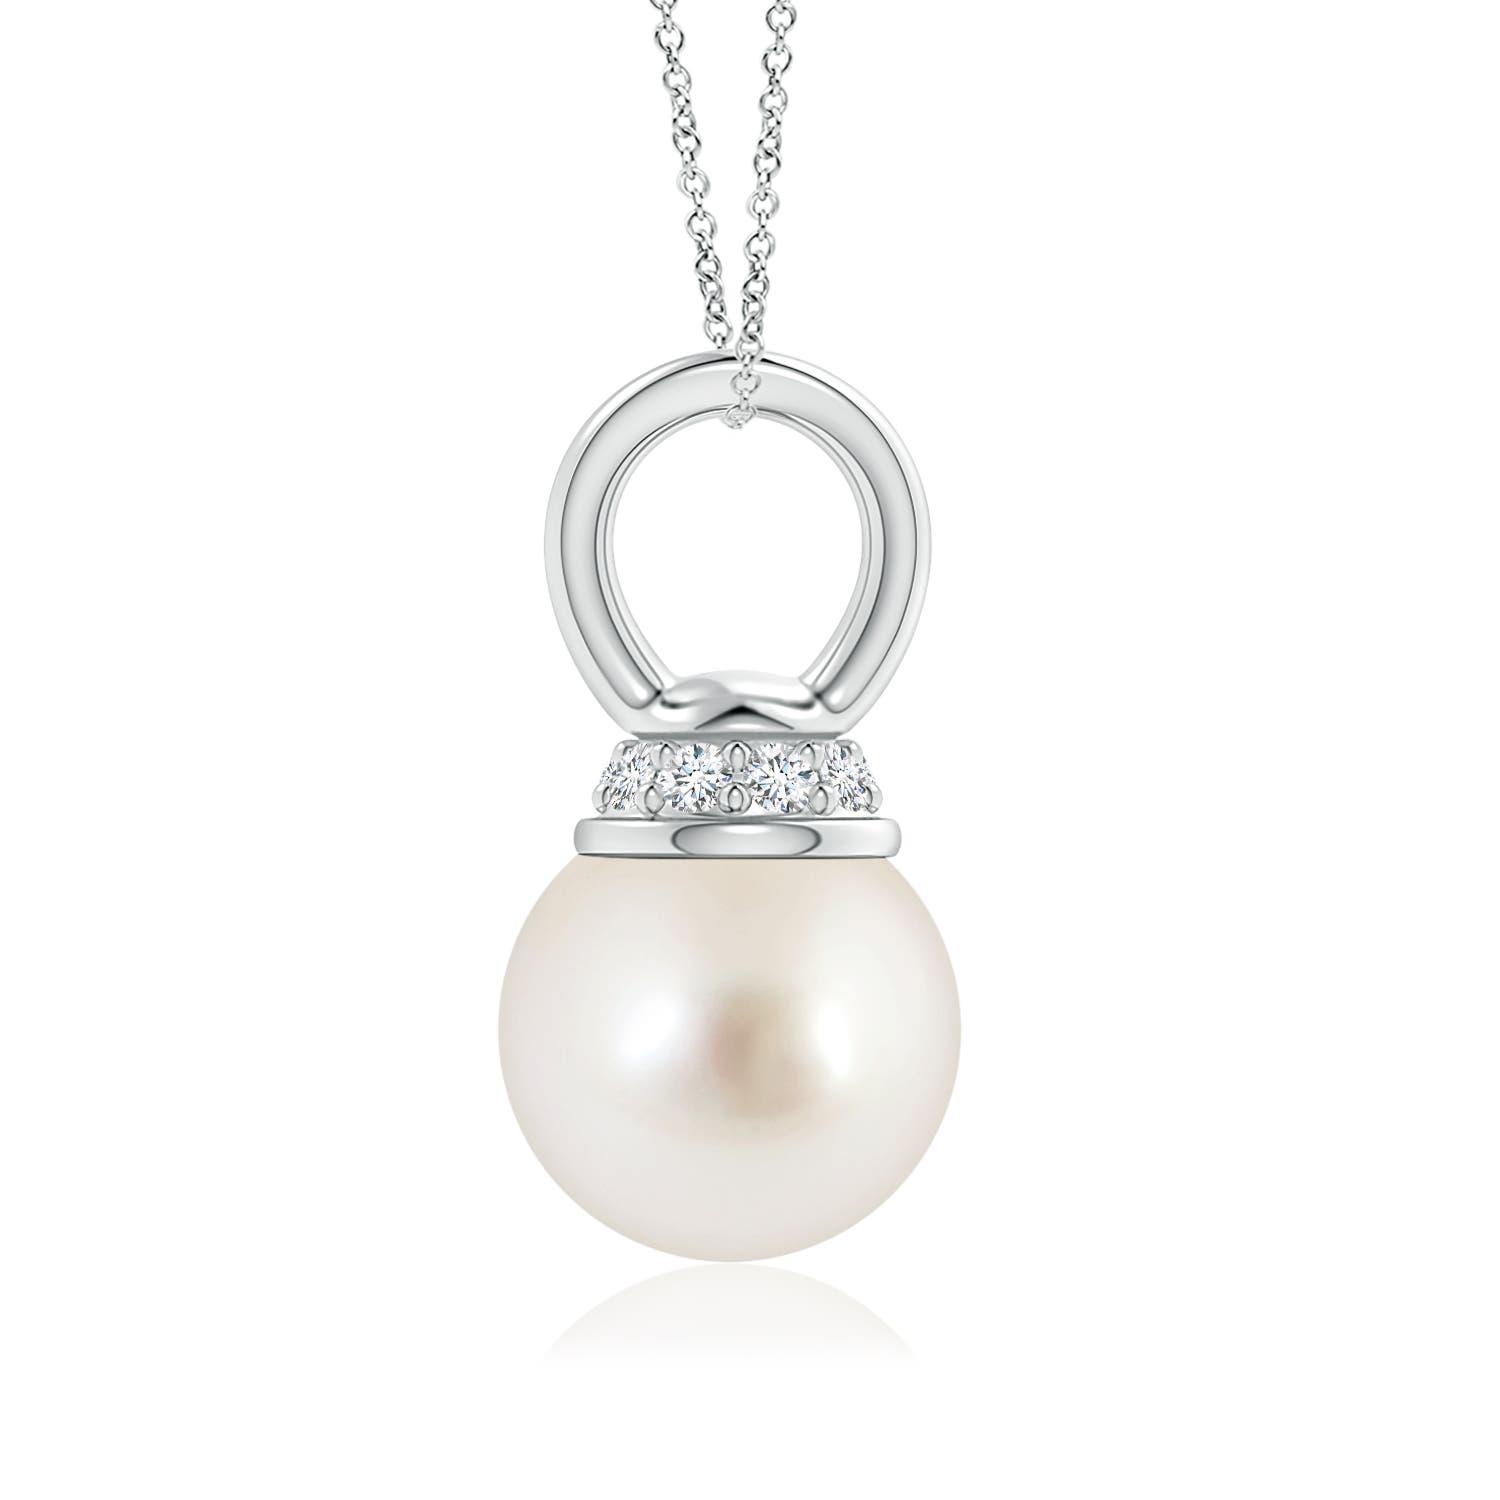 AAAA - South Sea Cultured Pearl / 3.79 CT / 14 KT White Gold